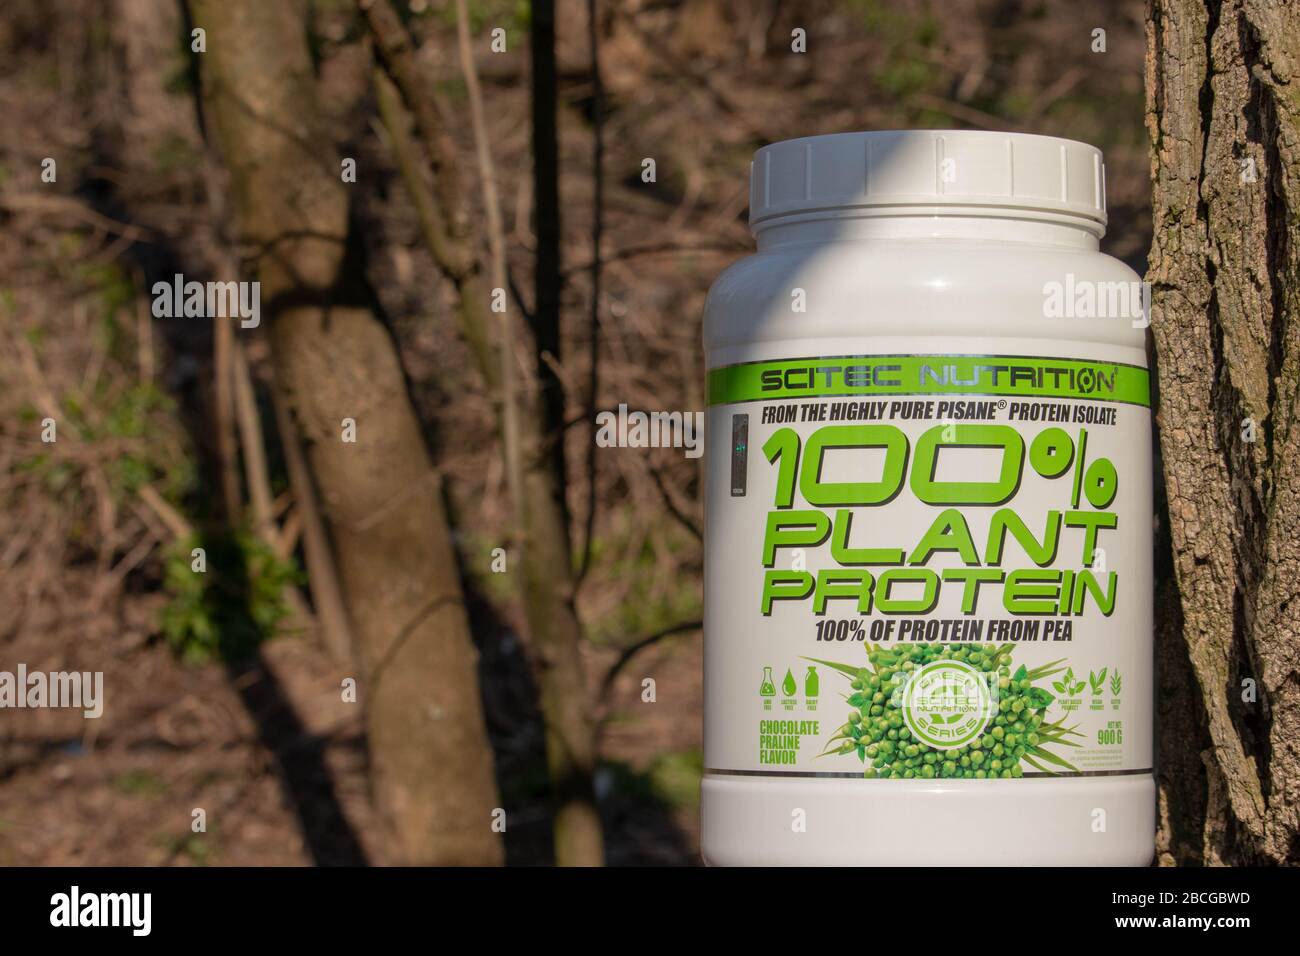 BELGRADE SERBIA 03 04 2020 Plant protein powder in bottle from Scitec  Nutrition. Vegan/Vegetarian version of protein supplement made from pea.  Green p Stock Photo - Alamy